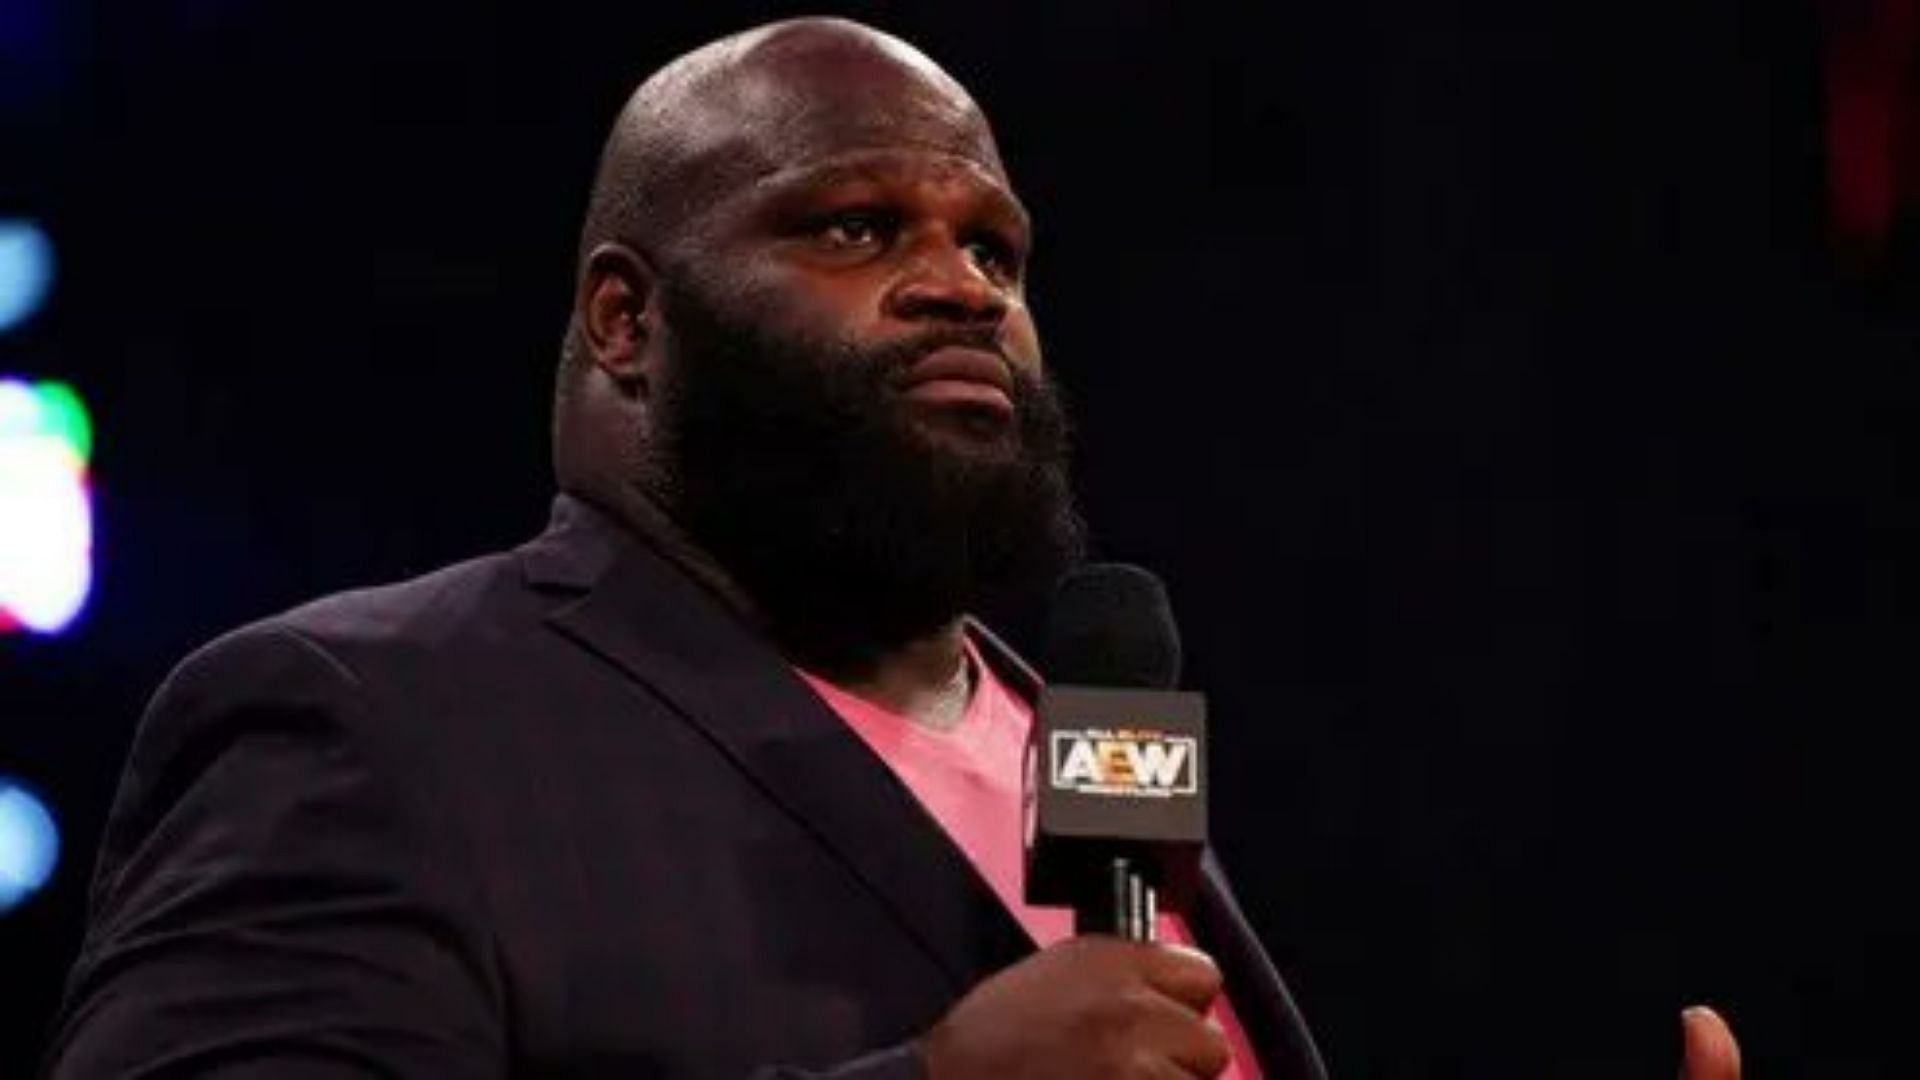 Mark Henry cutting a promo for AEW in 2021